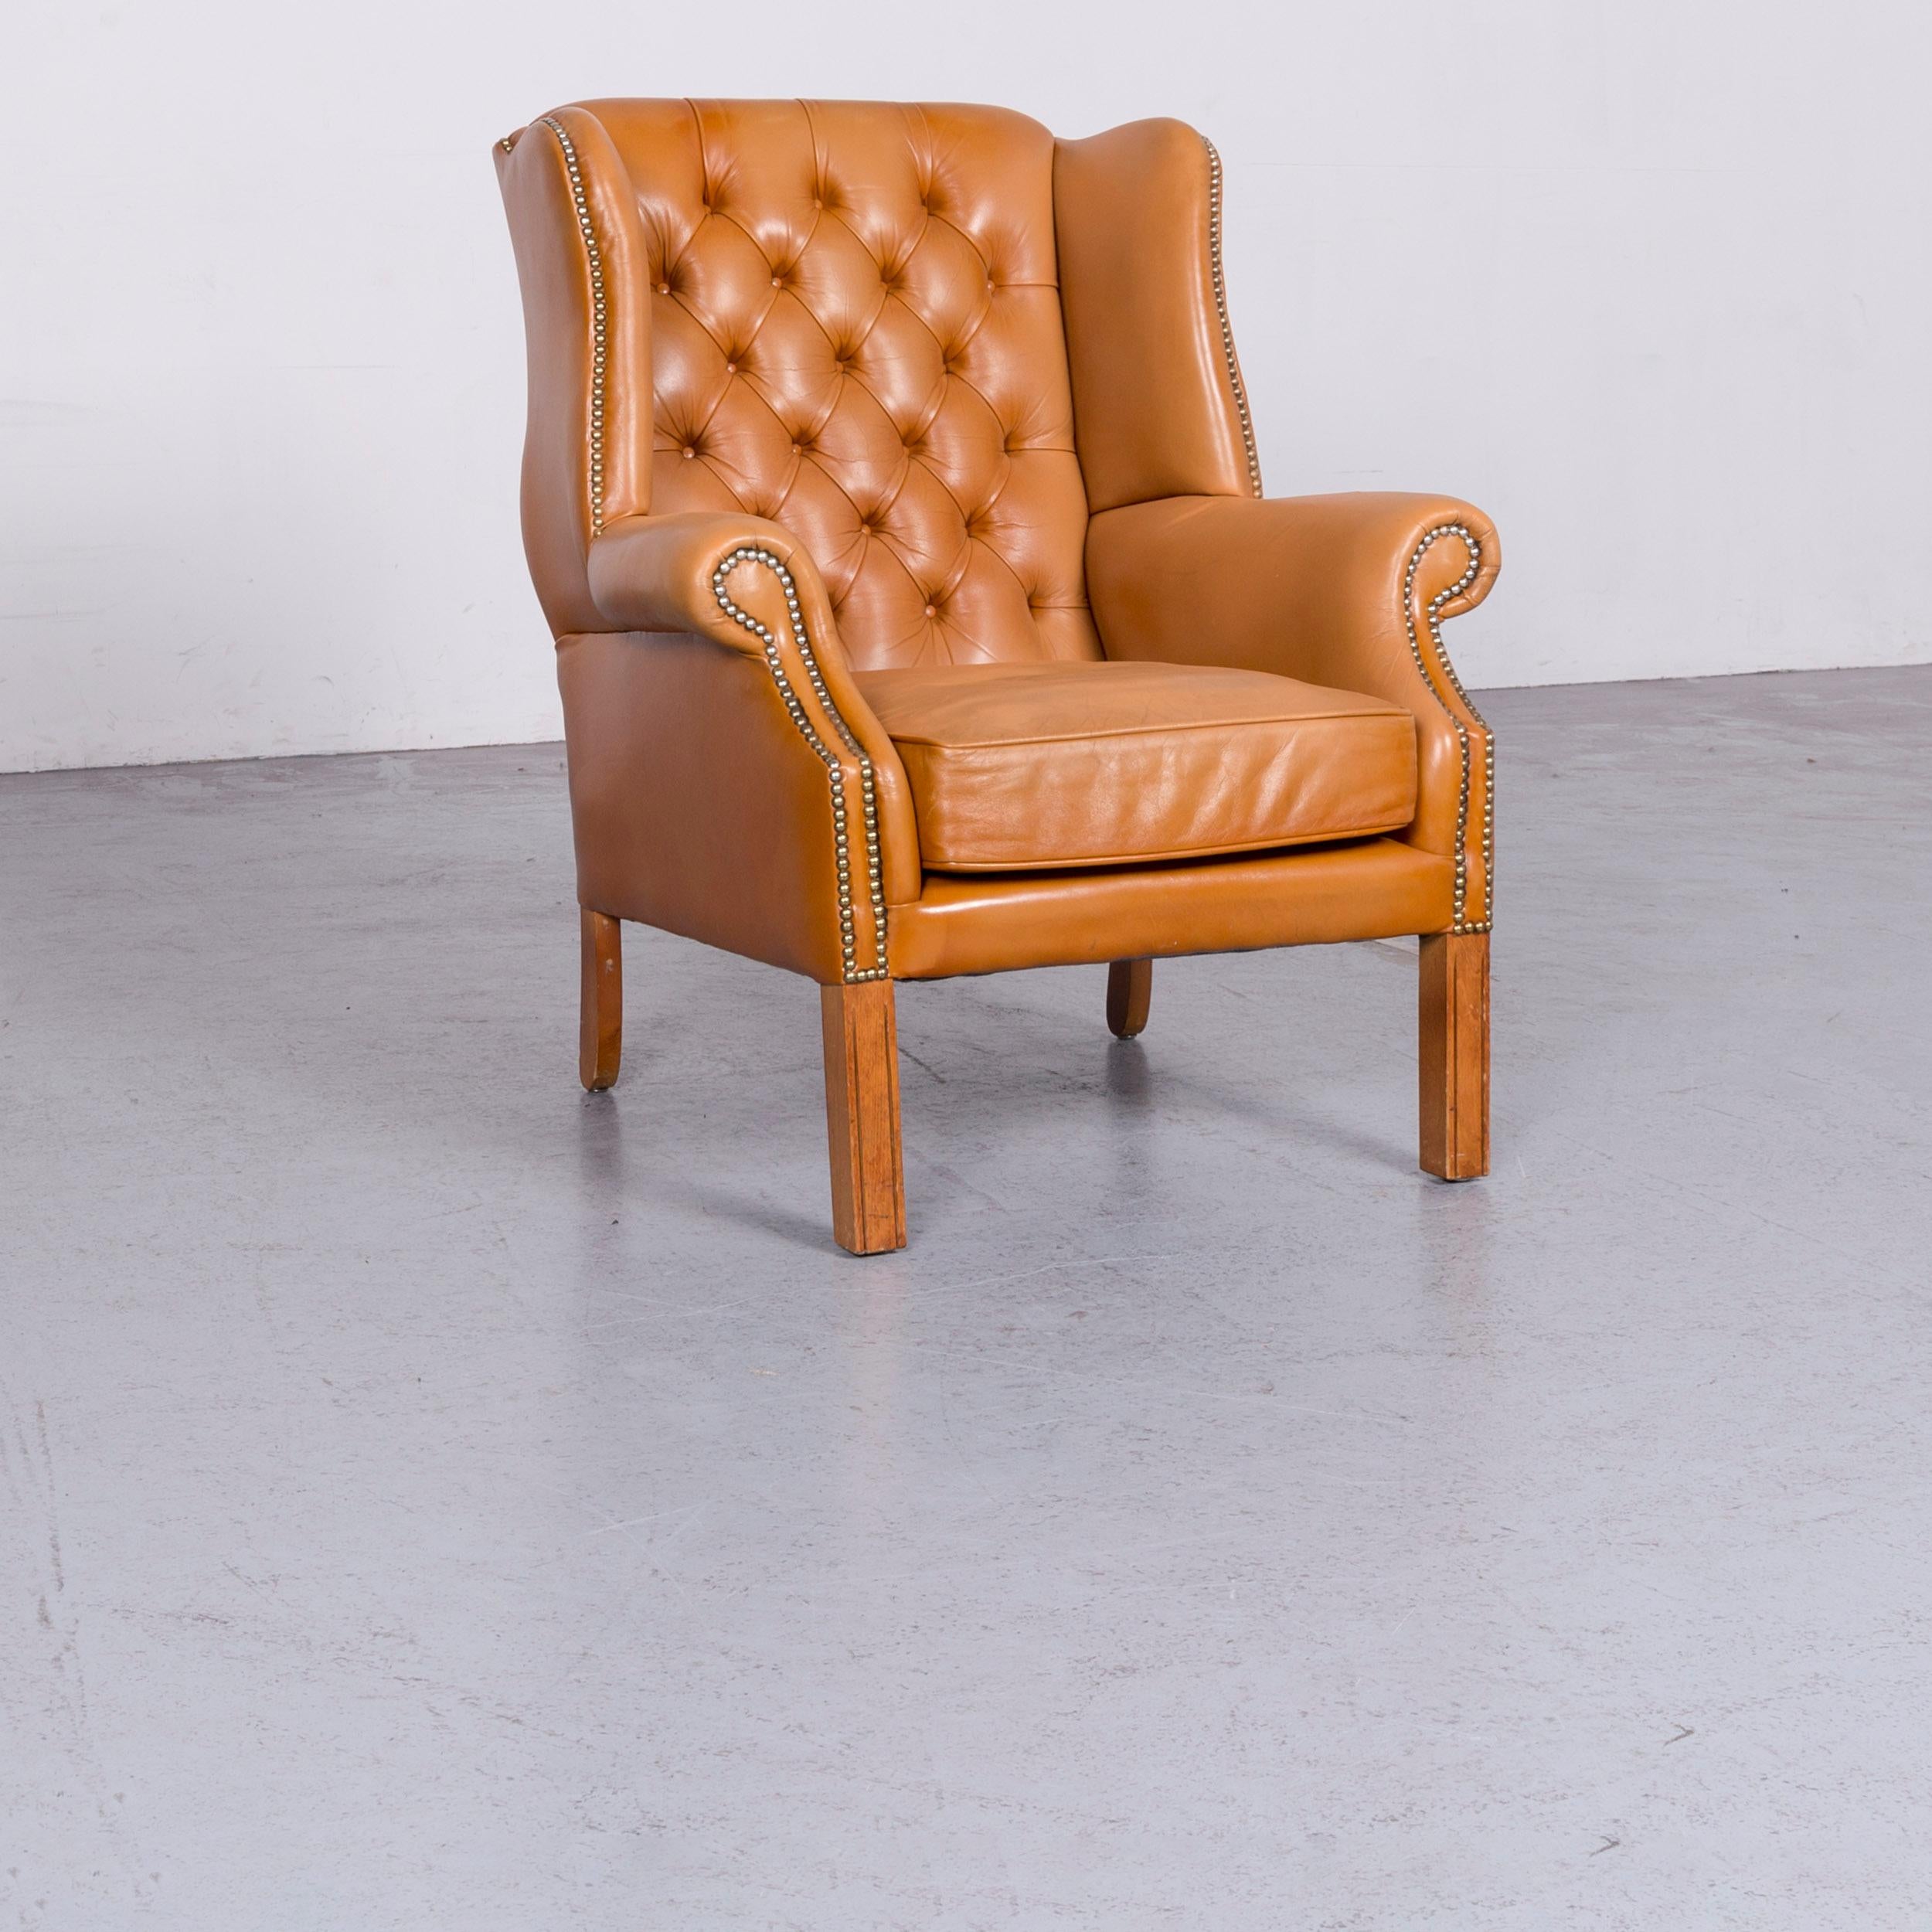 We bring to you a Windmill Chesterfield leather armchair set cognac one-seat vintage chair.

































     